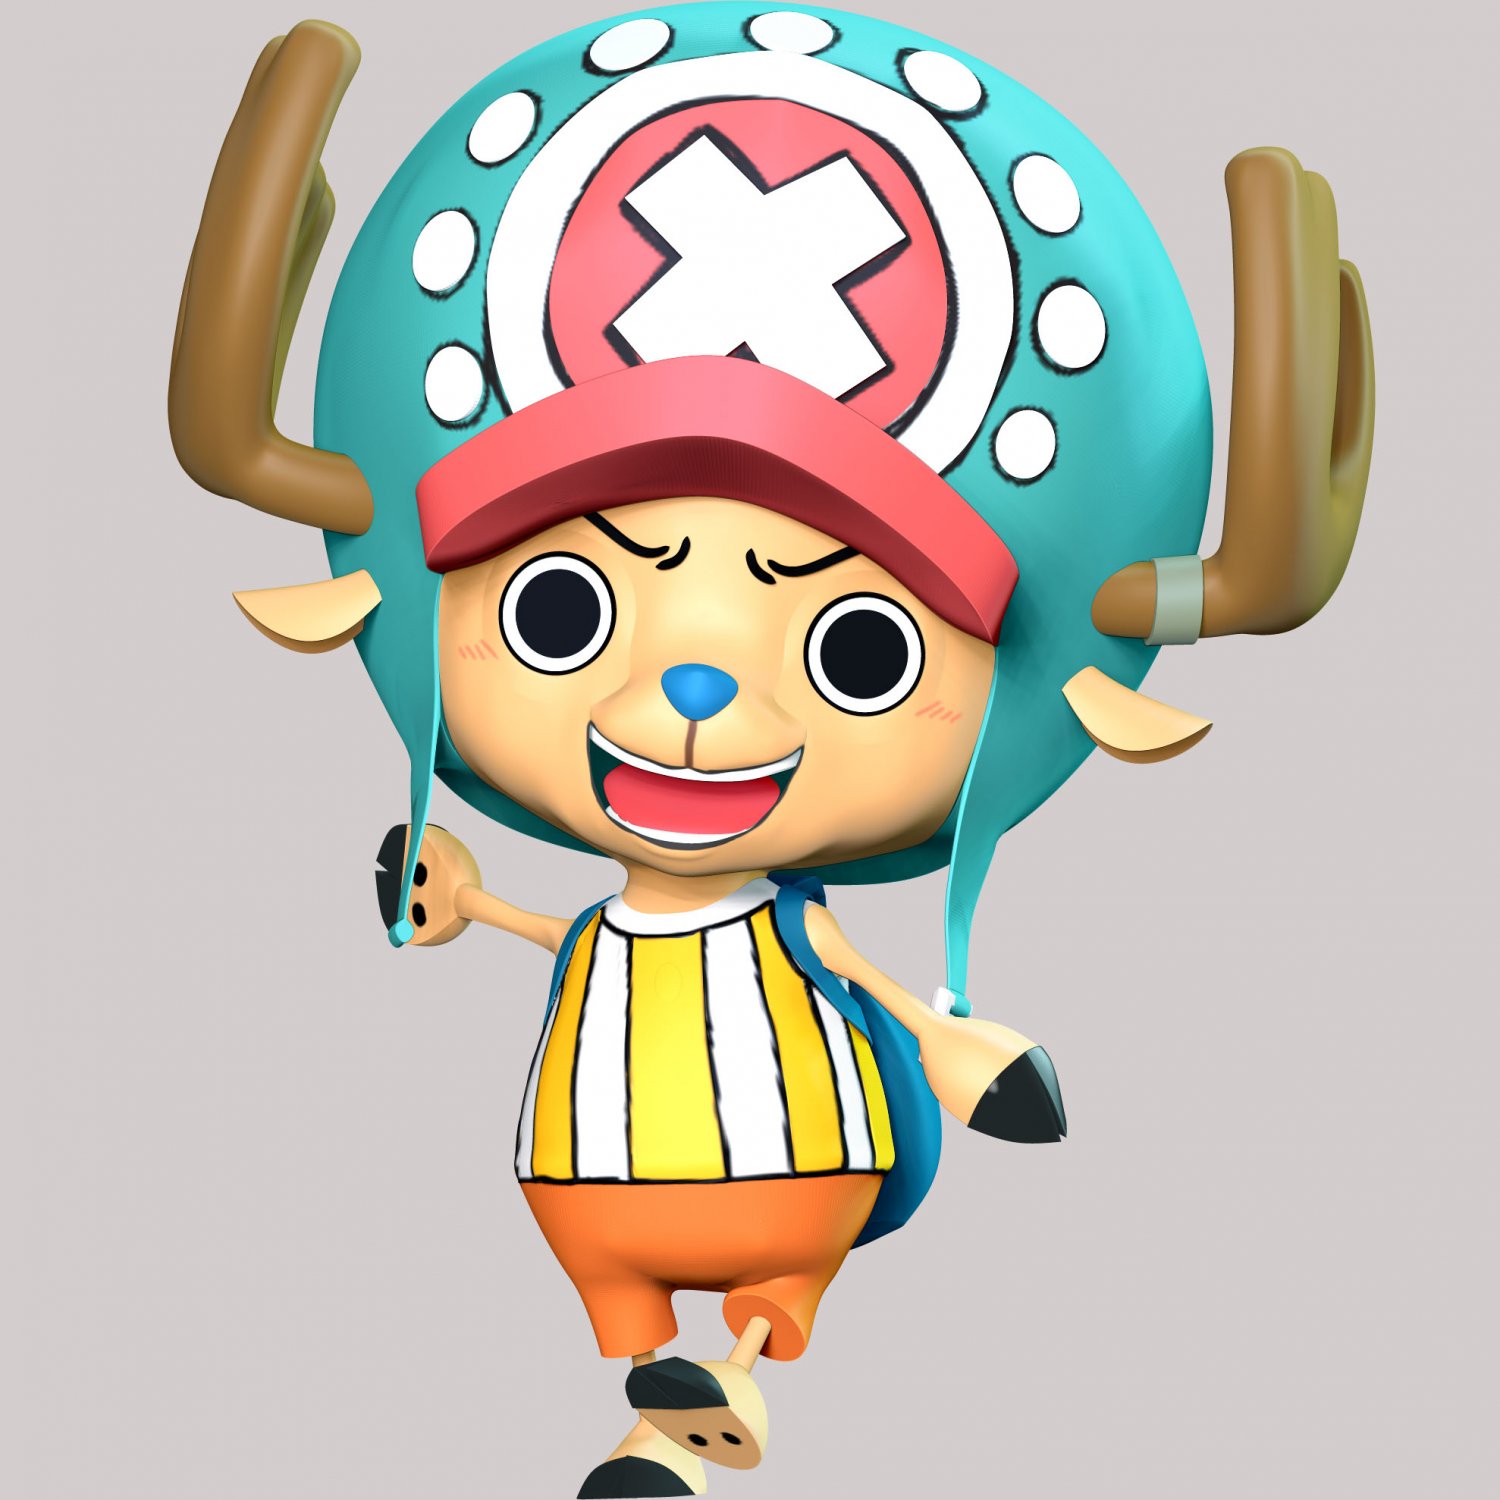 Tony Tony Chopper Hi! - One Piece Photographic Print for Sale by